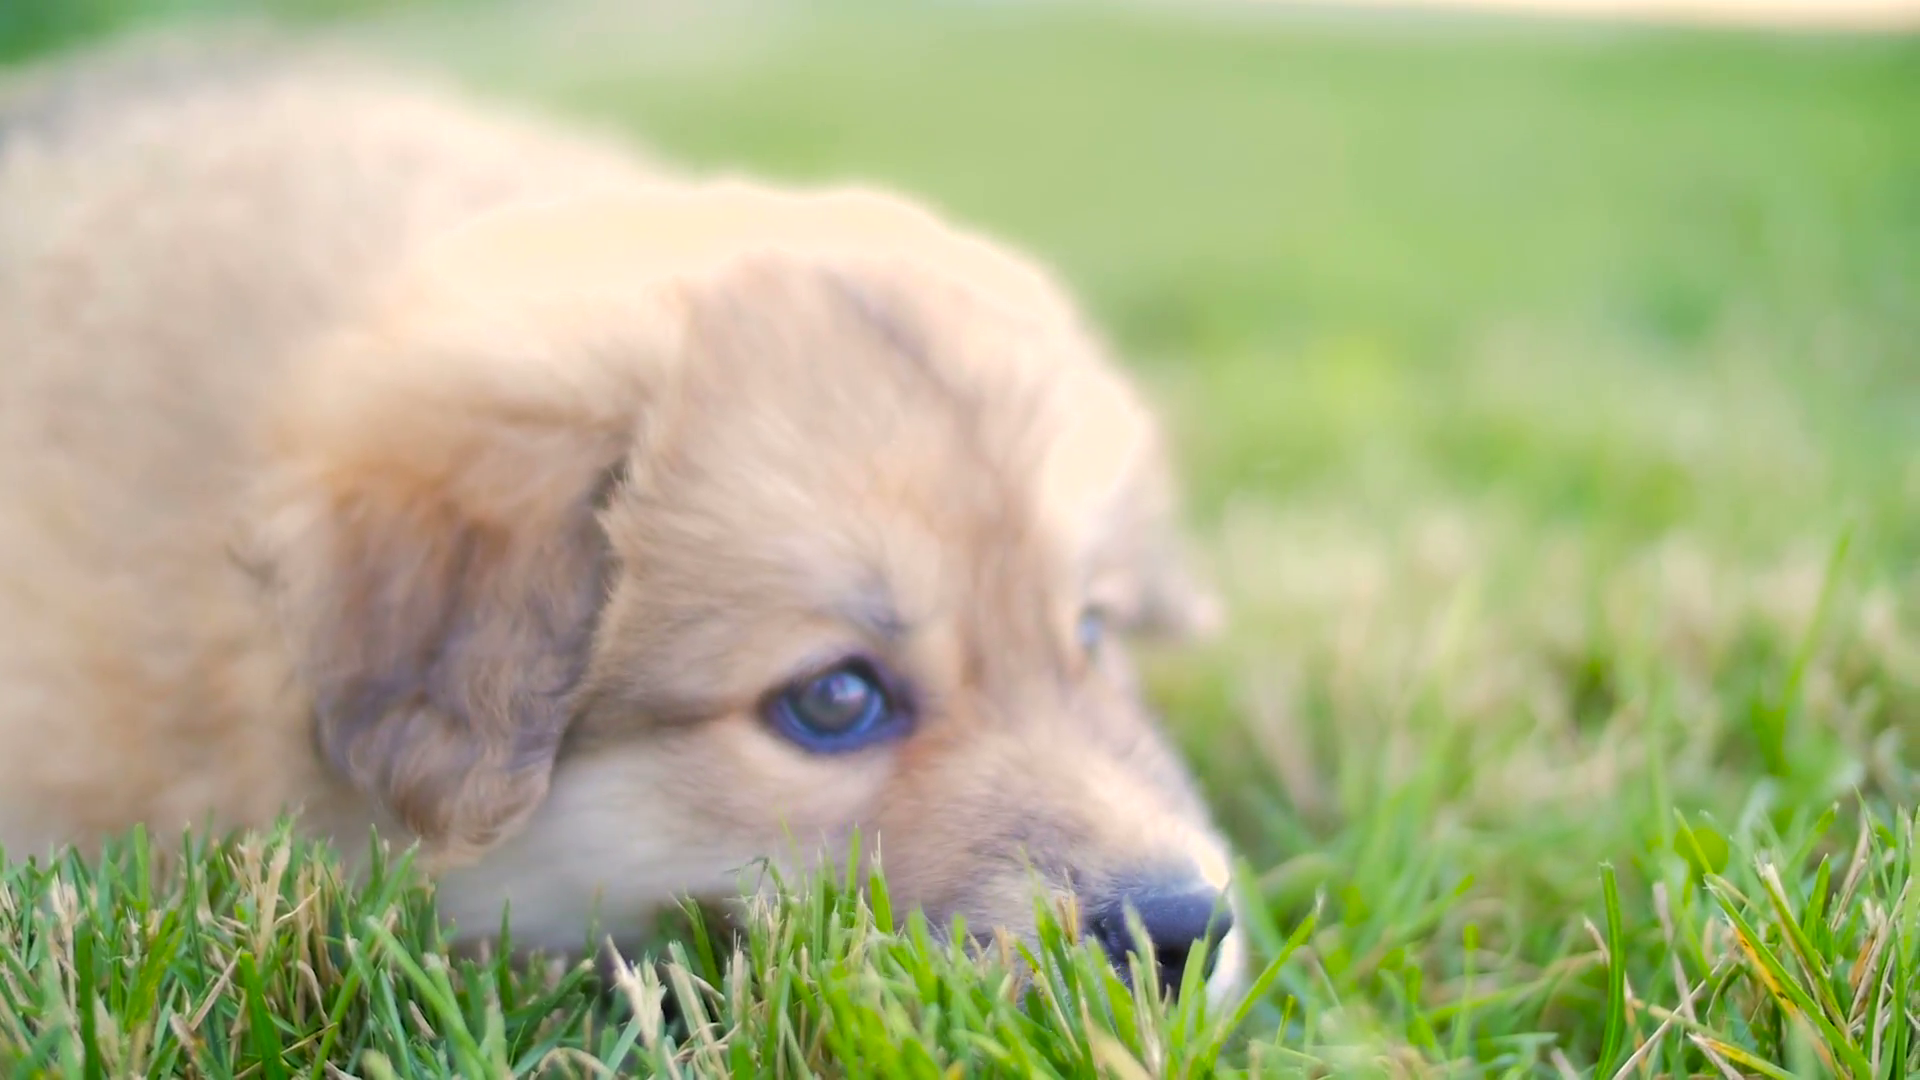 Puppy Dog Outside On Grass Looking Around Stock Video Footage ...